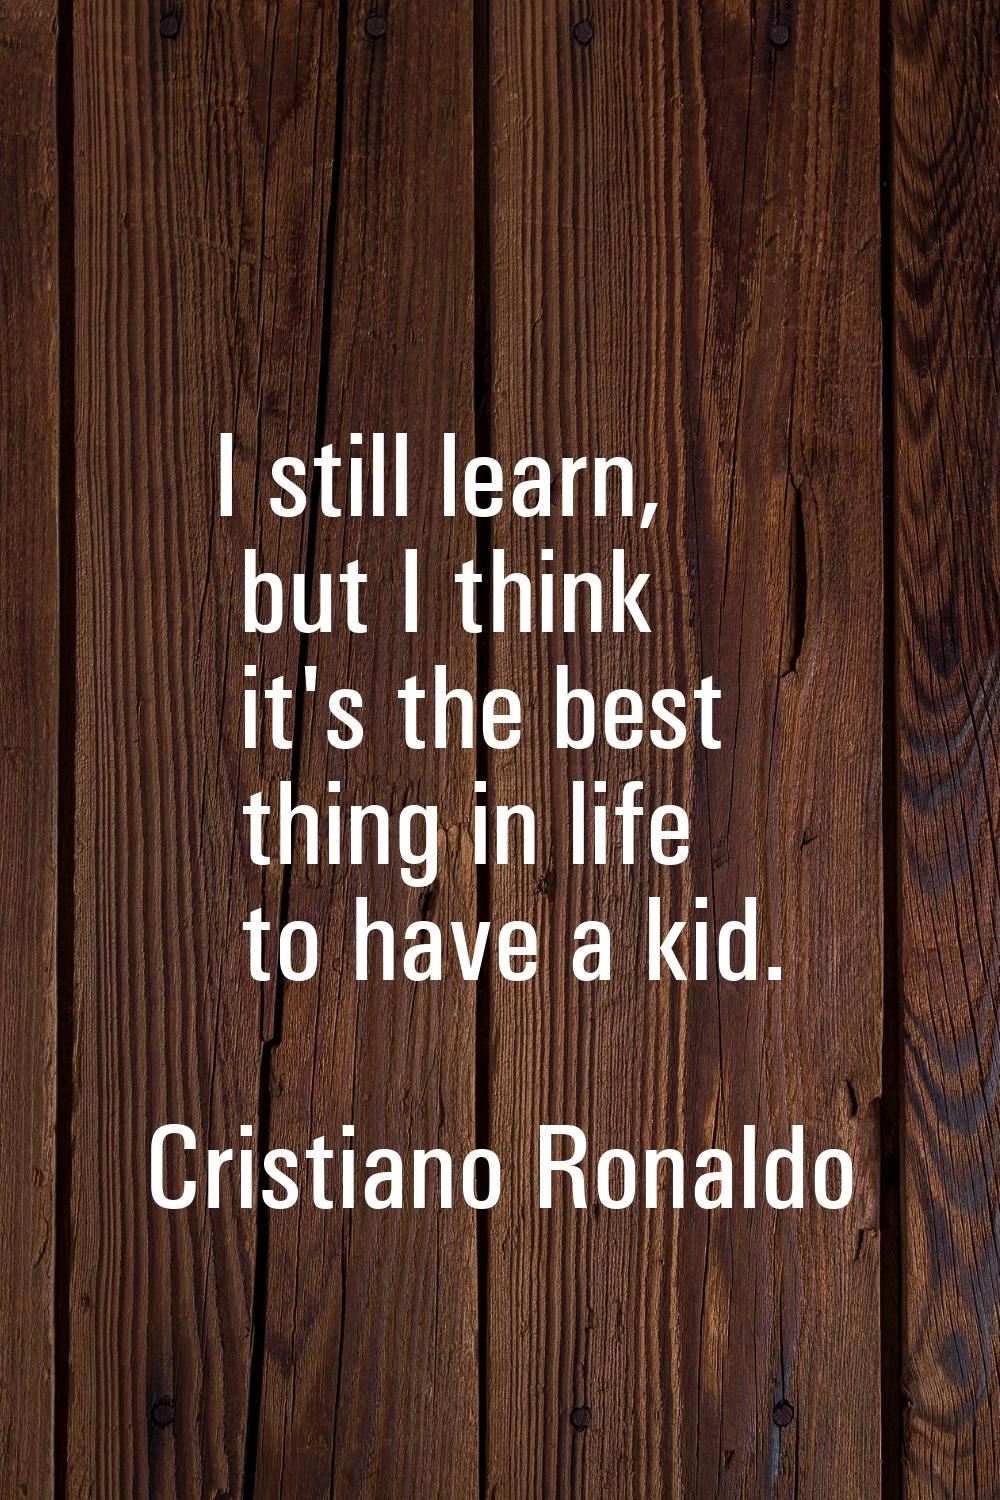 I still learn, but I think it's the best thing in life to have a kid.